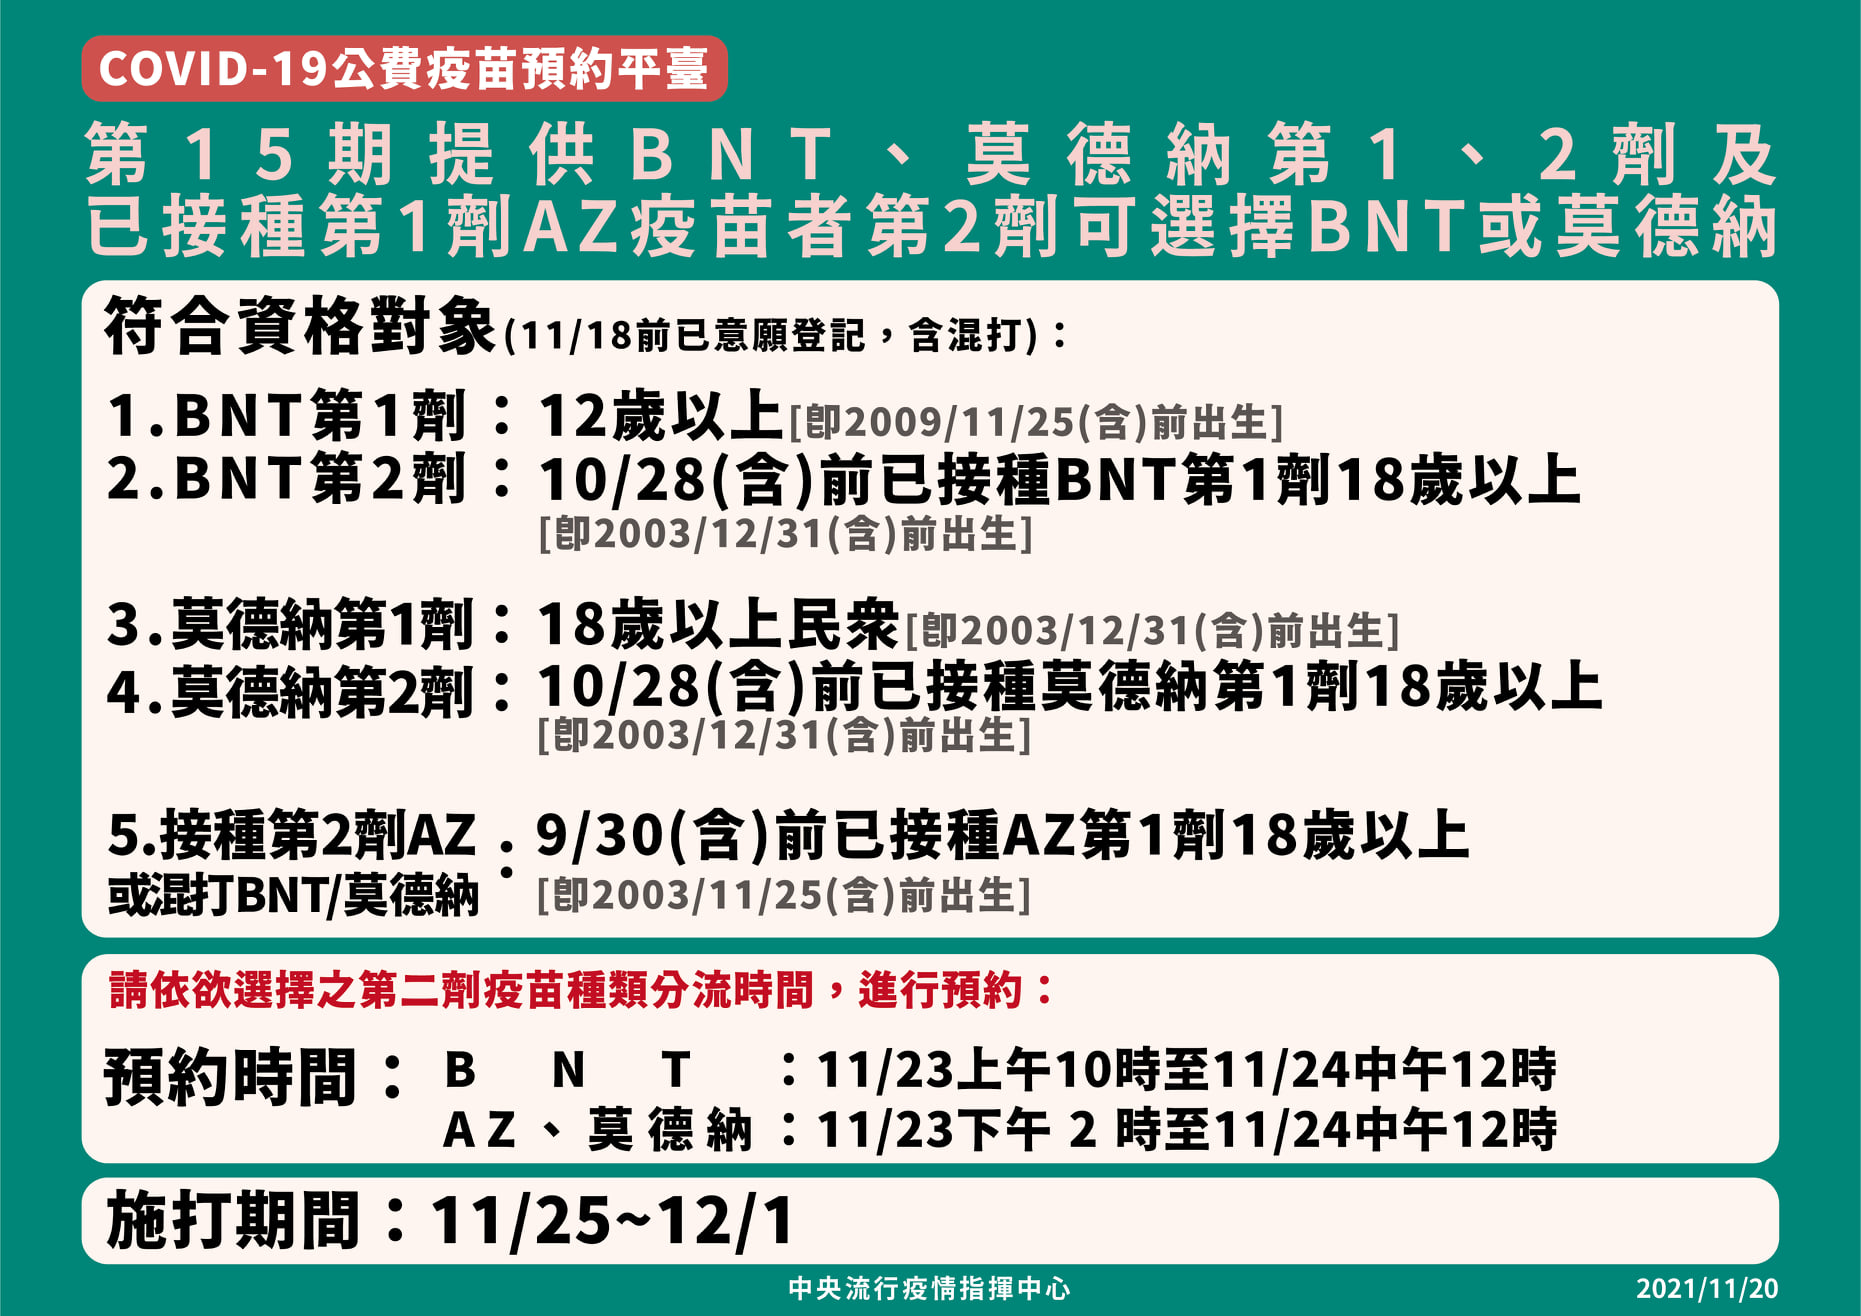 Eligibility and appointment time slots. (Photo / Provided by the Taiwan Centers for Disease Control)  